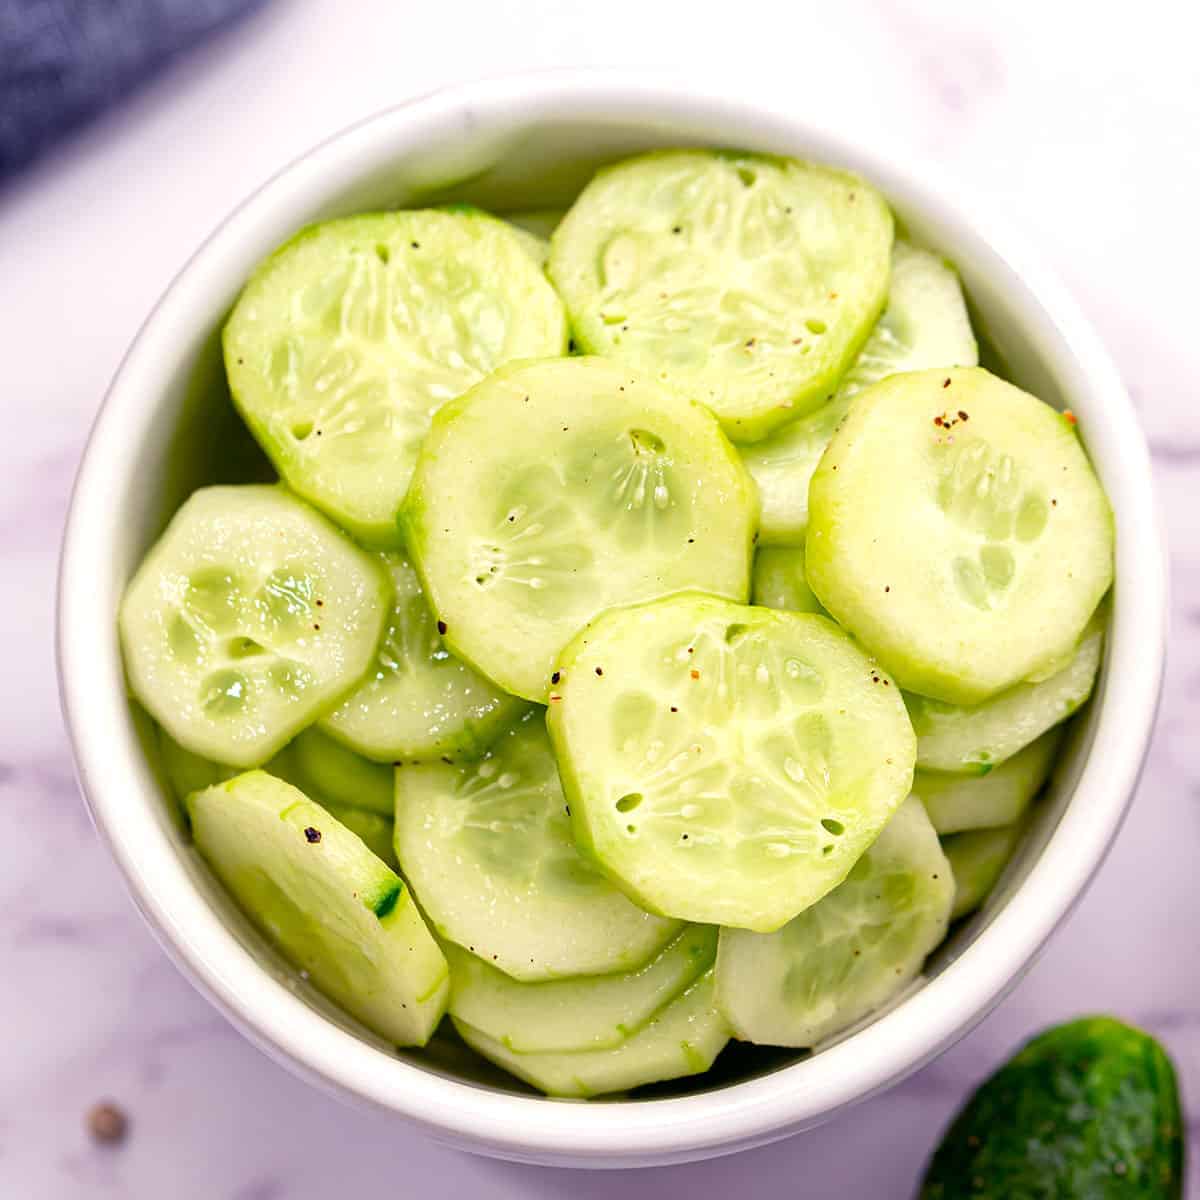 How long can you keep cucumbers in vinegar? - Eating Expired